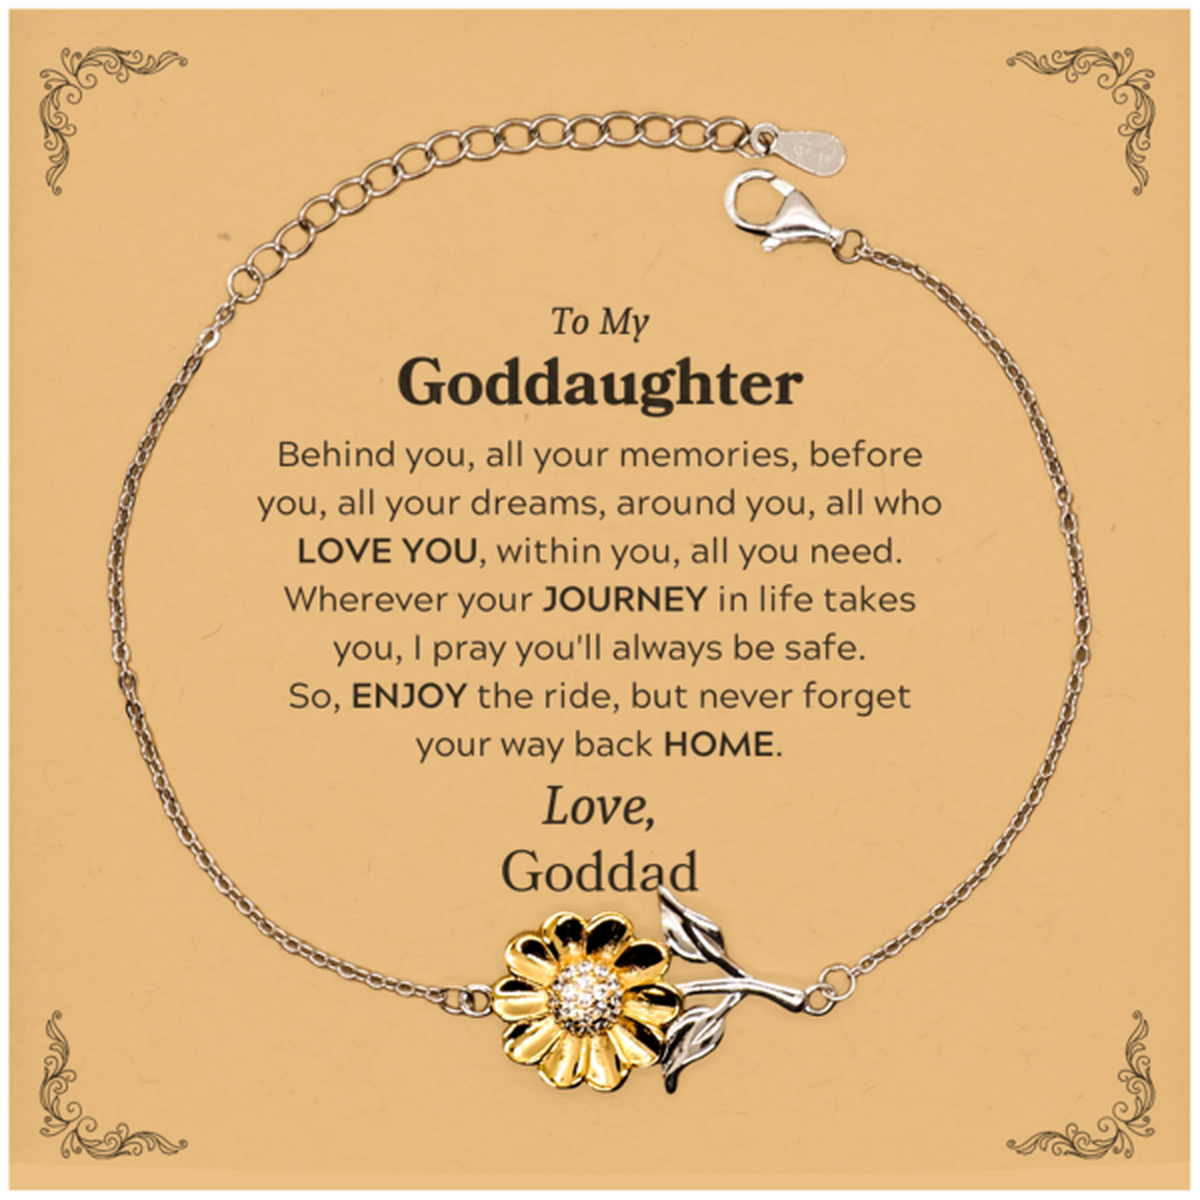 To My Goddaughter Graduation Gifts from Goddad, Goddaughter Sunflower Bracelet Christmas Birthday Gifts for Goddaughter Behind you, all your memories, before you, all your dreams. Love, Goddad